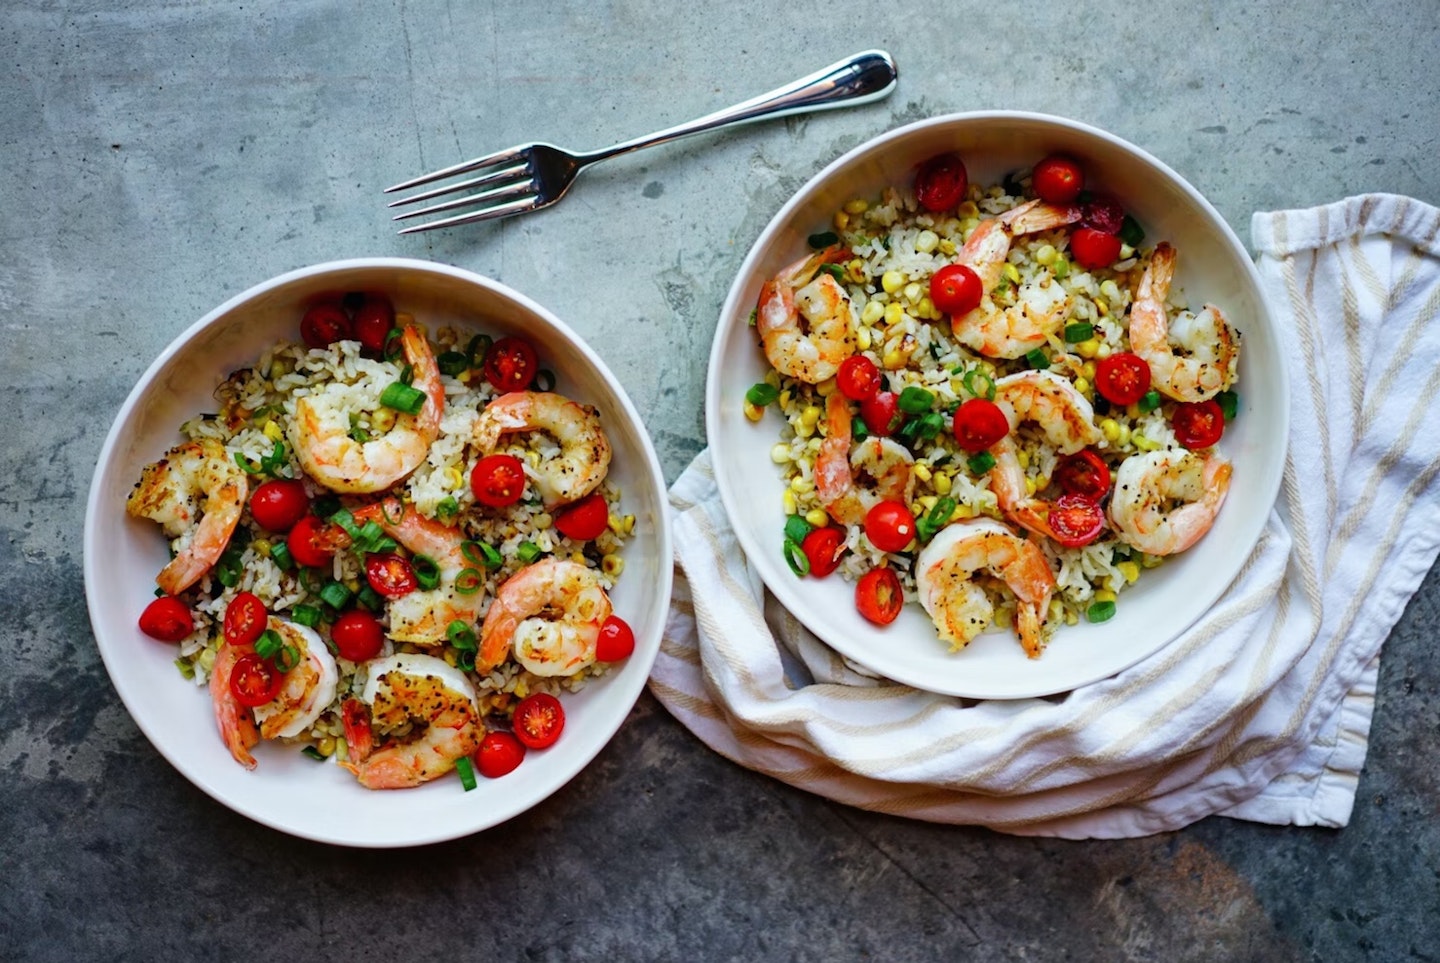 Best food subscription boxes: two bowls of prawns, grains and vegetables